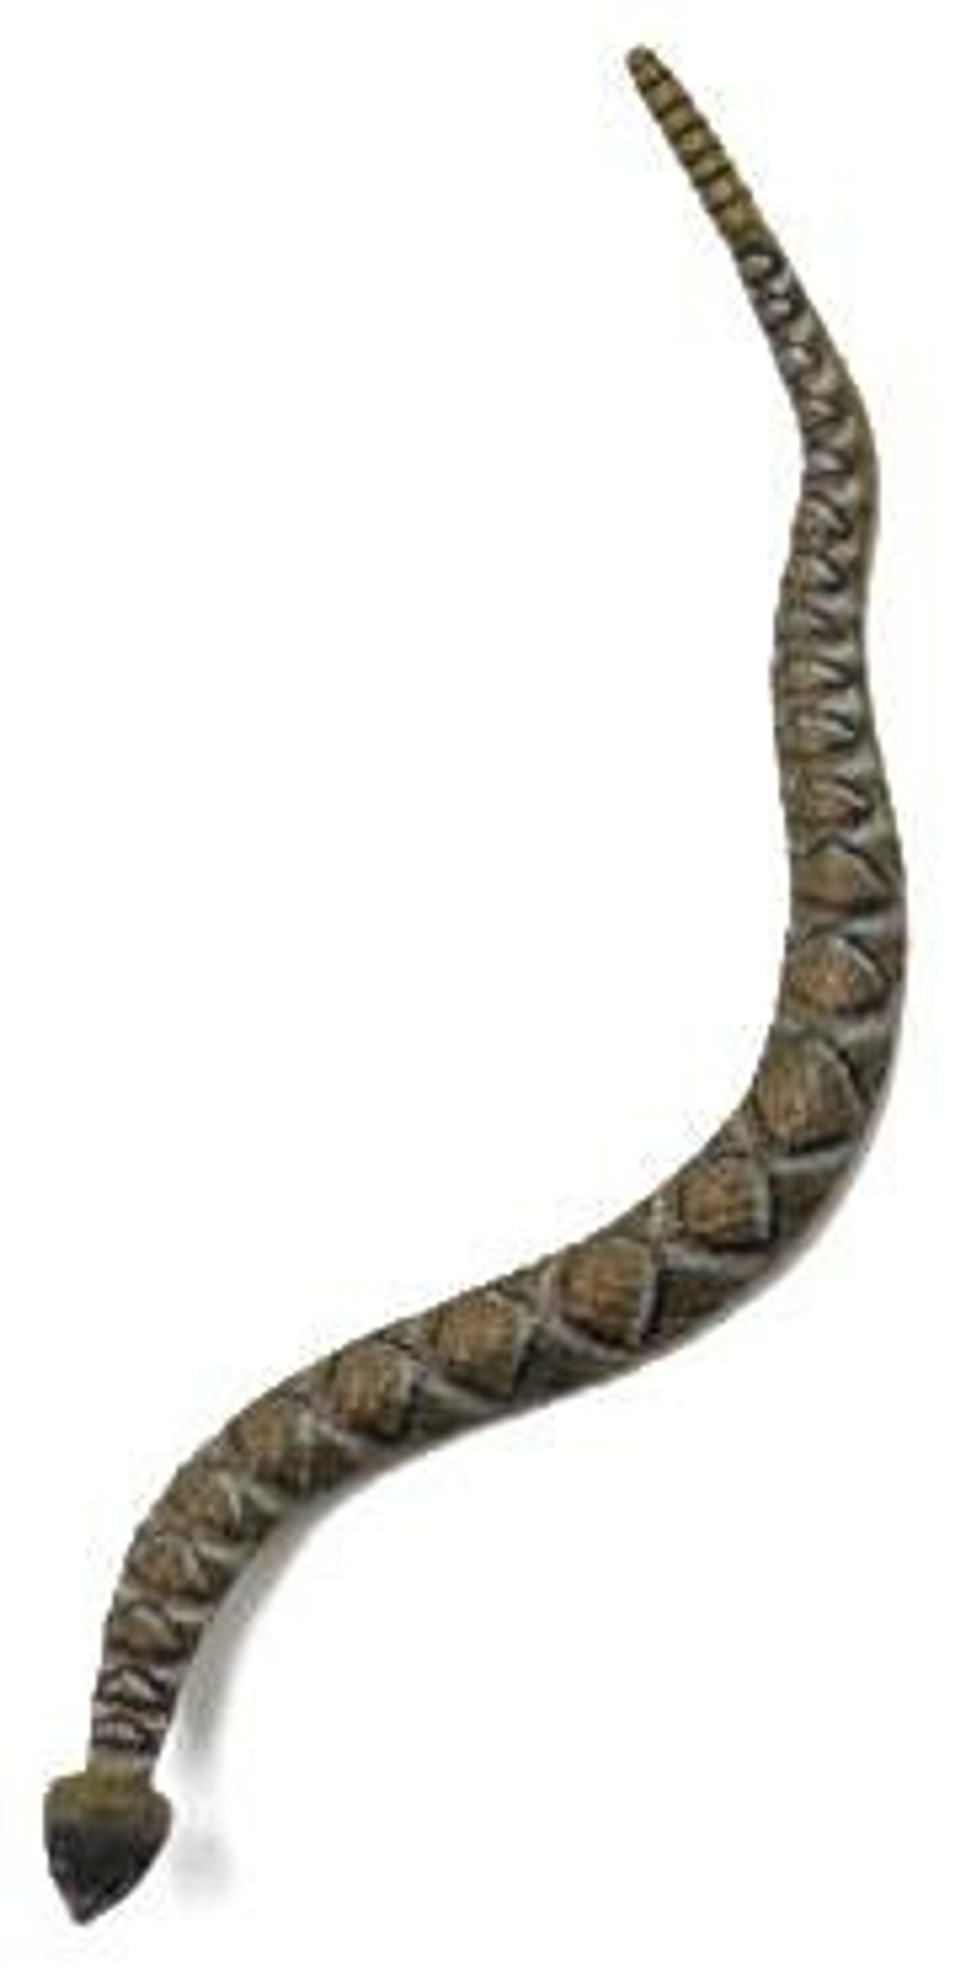 Papo Snakes - Rattlesnake 50237 - Coiled and Ready to Strike